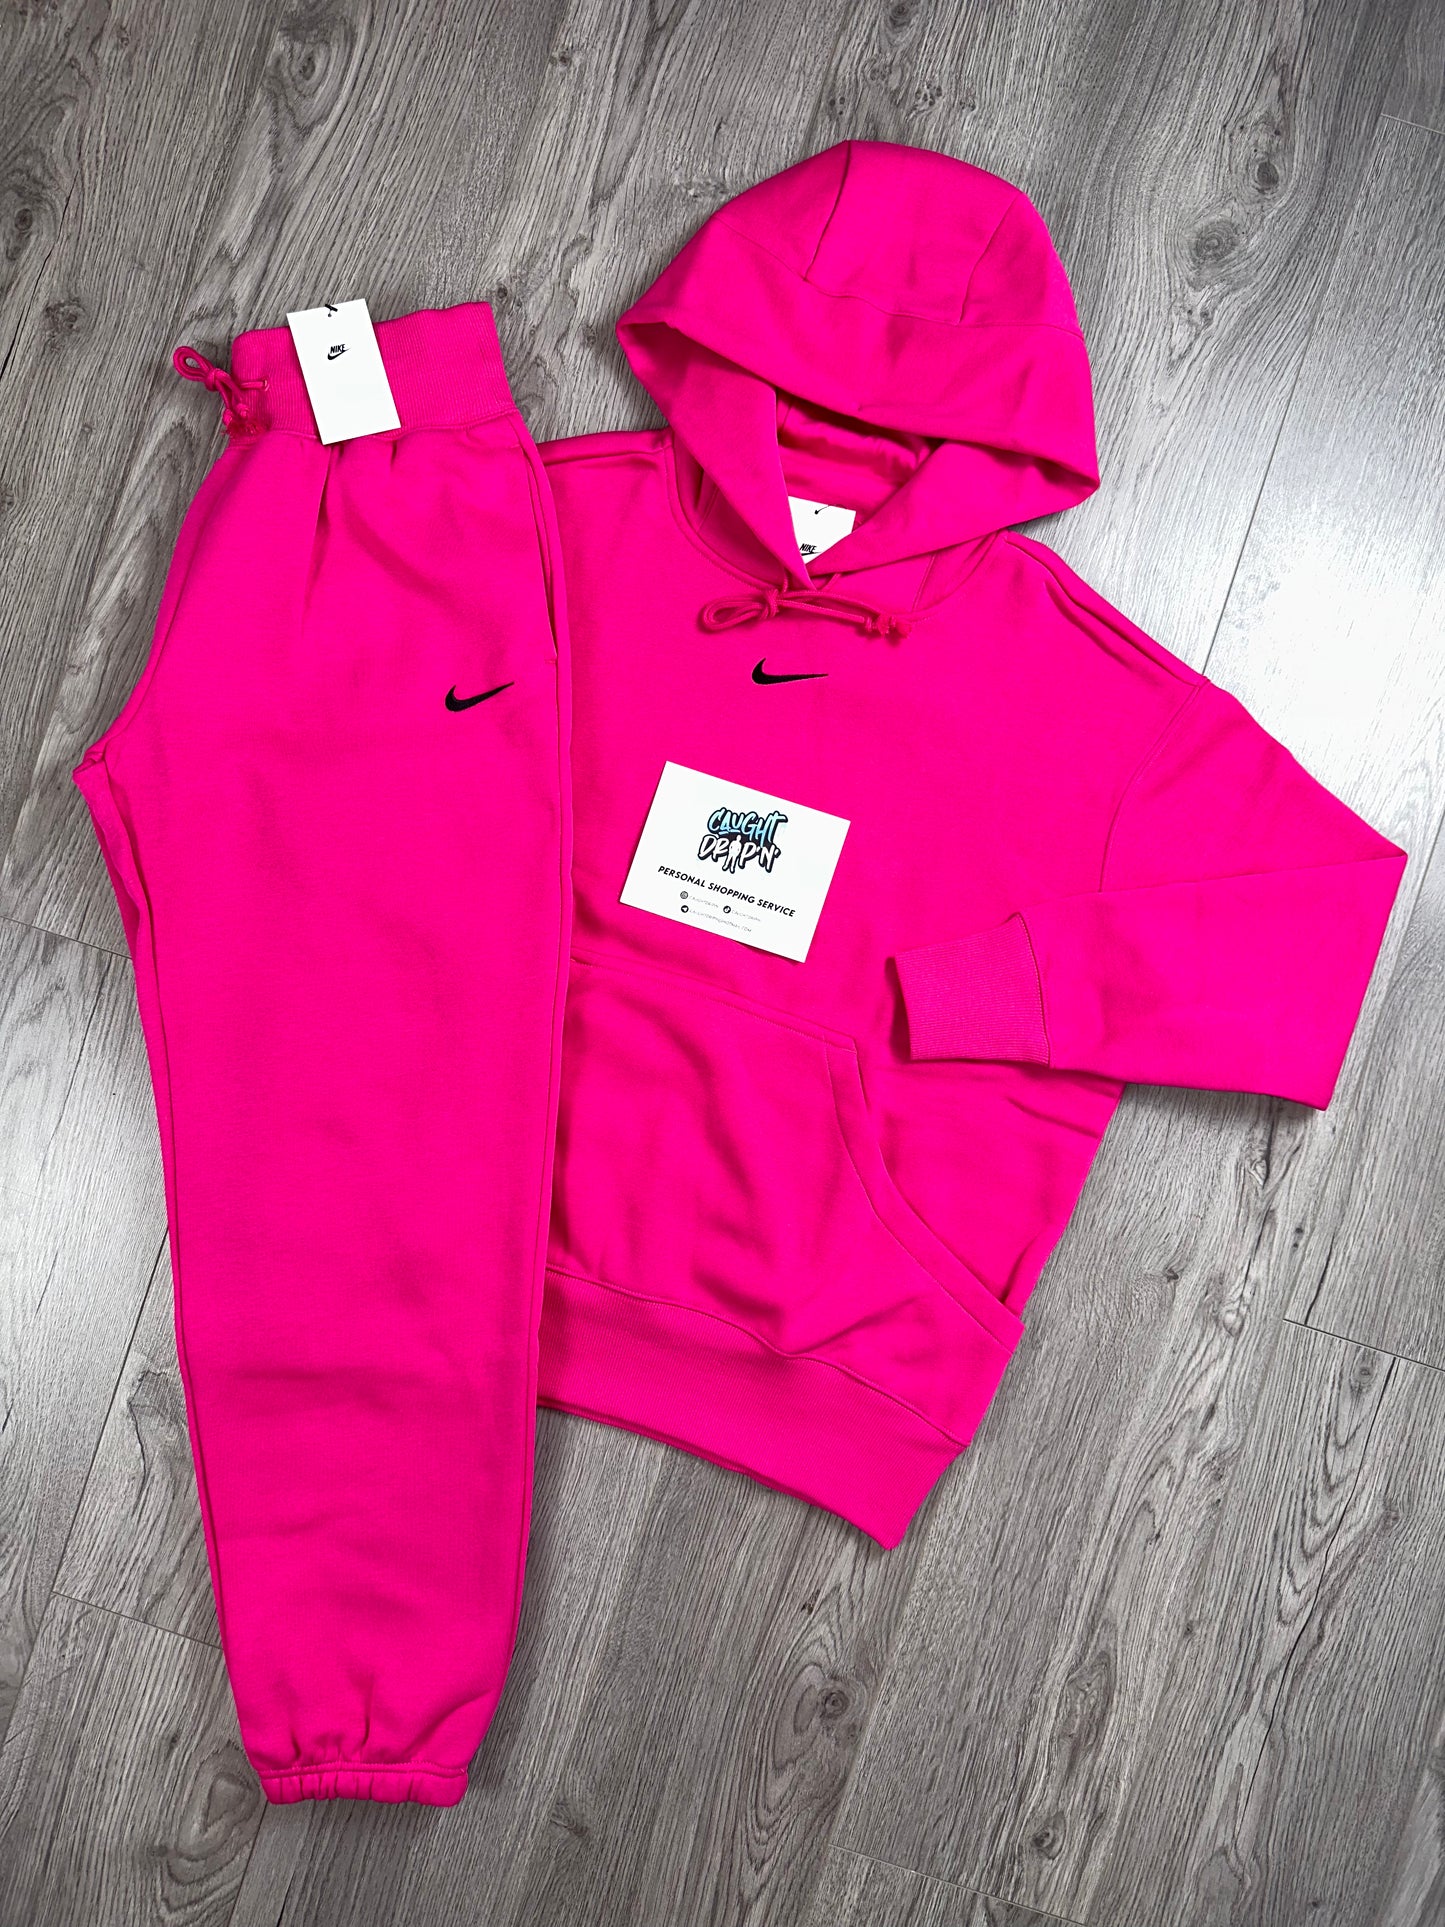 Women’s Hot Pink Oversized Tracksuit